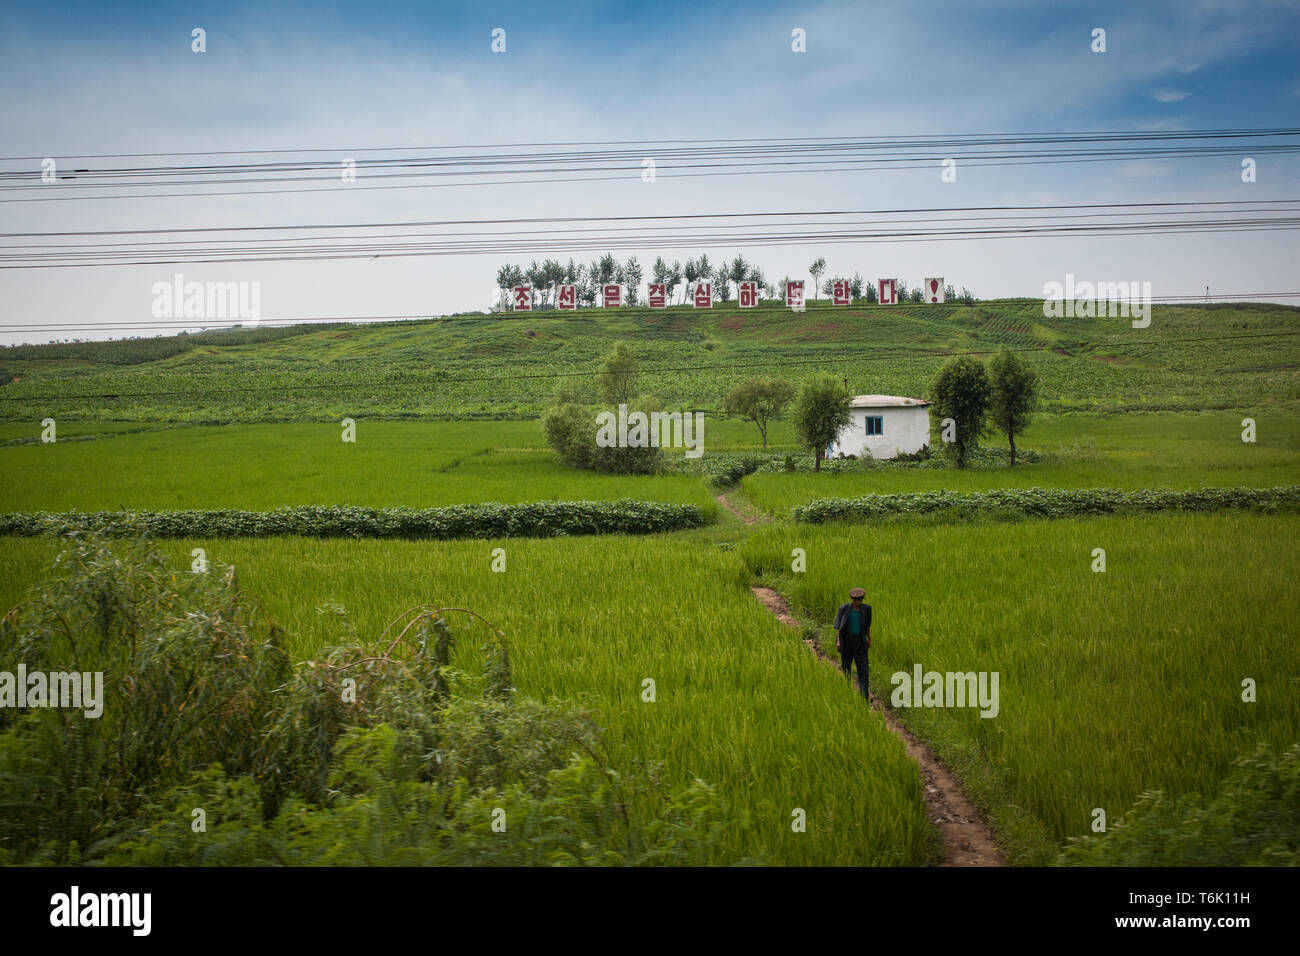 Between Dandong and Pyongyang, rural scenes show technified agriculture but no advertising.  Signs encourage patriotic and revolutionary values and wa Stock Photo